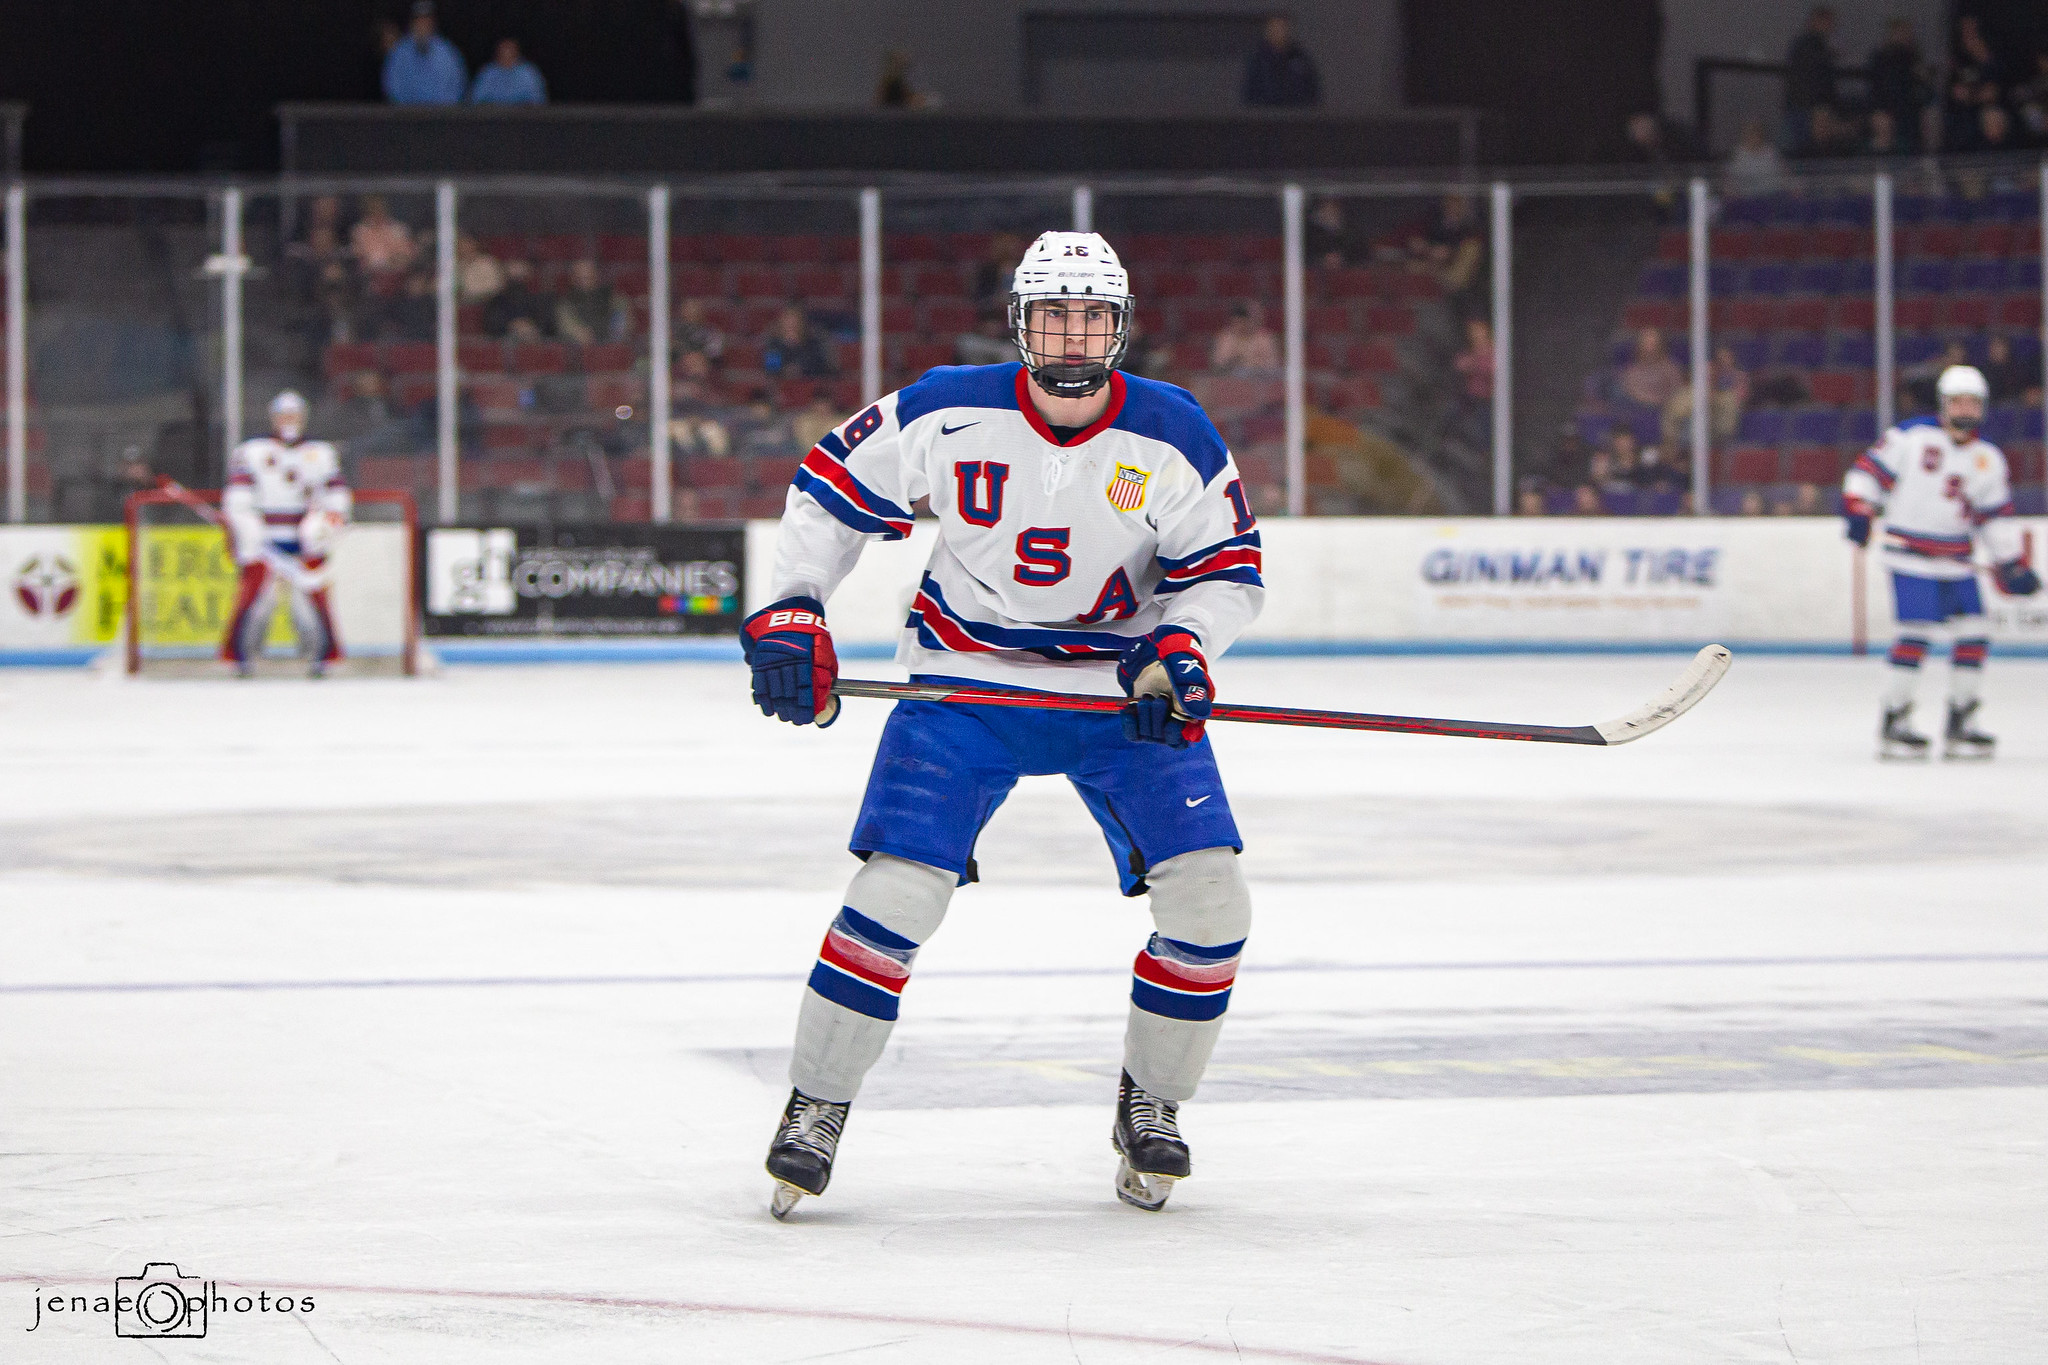 5 Bold Predictions For The 2022 NHL Draft